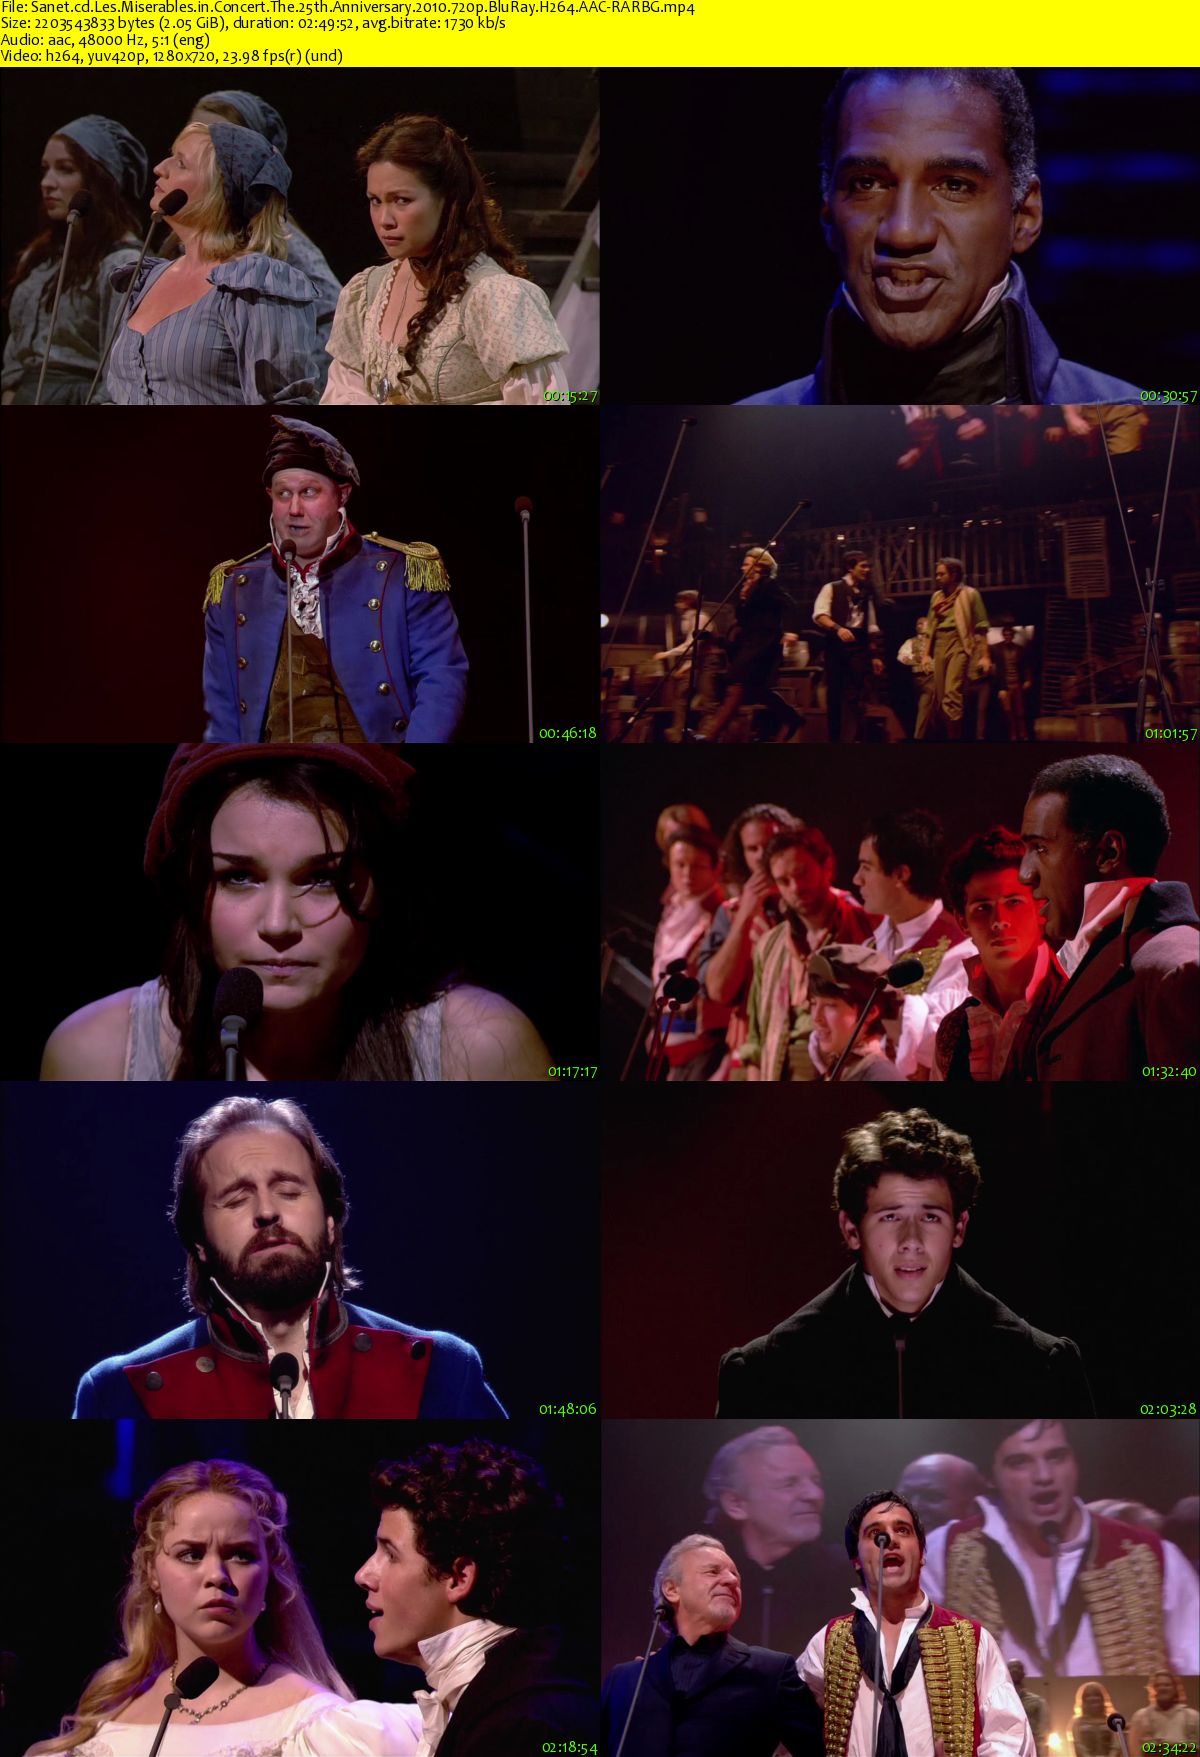 25th anniversary of les miserables